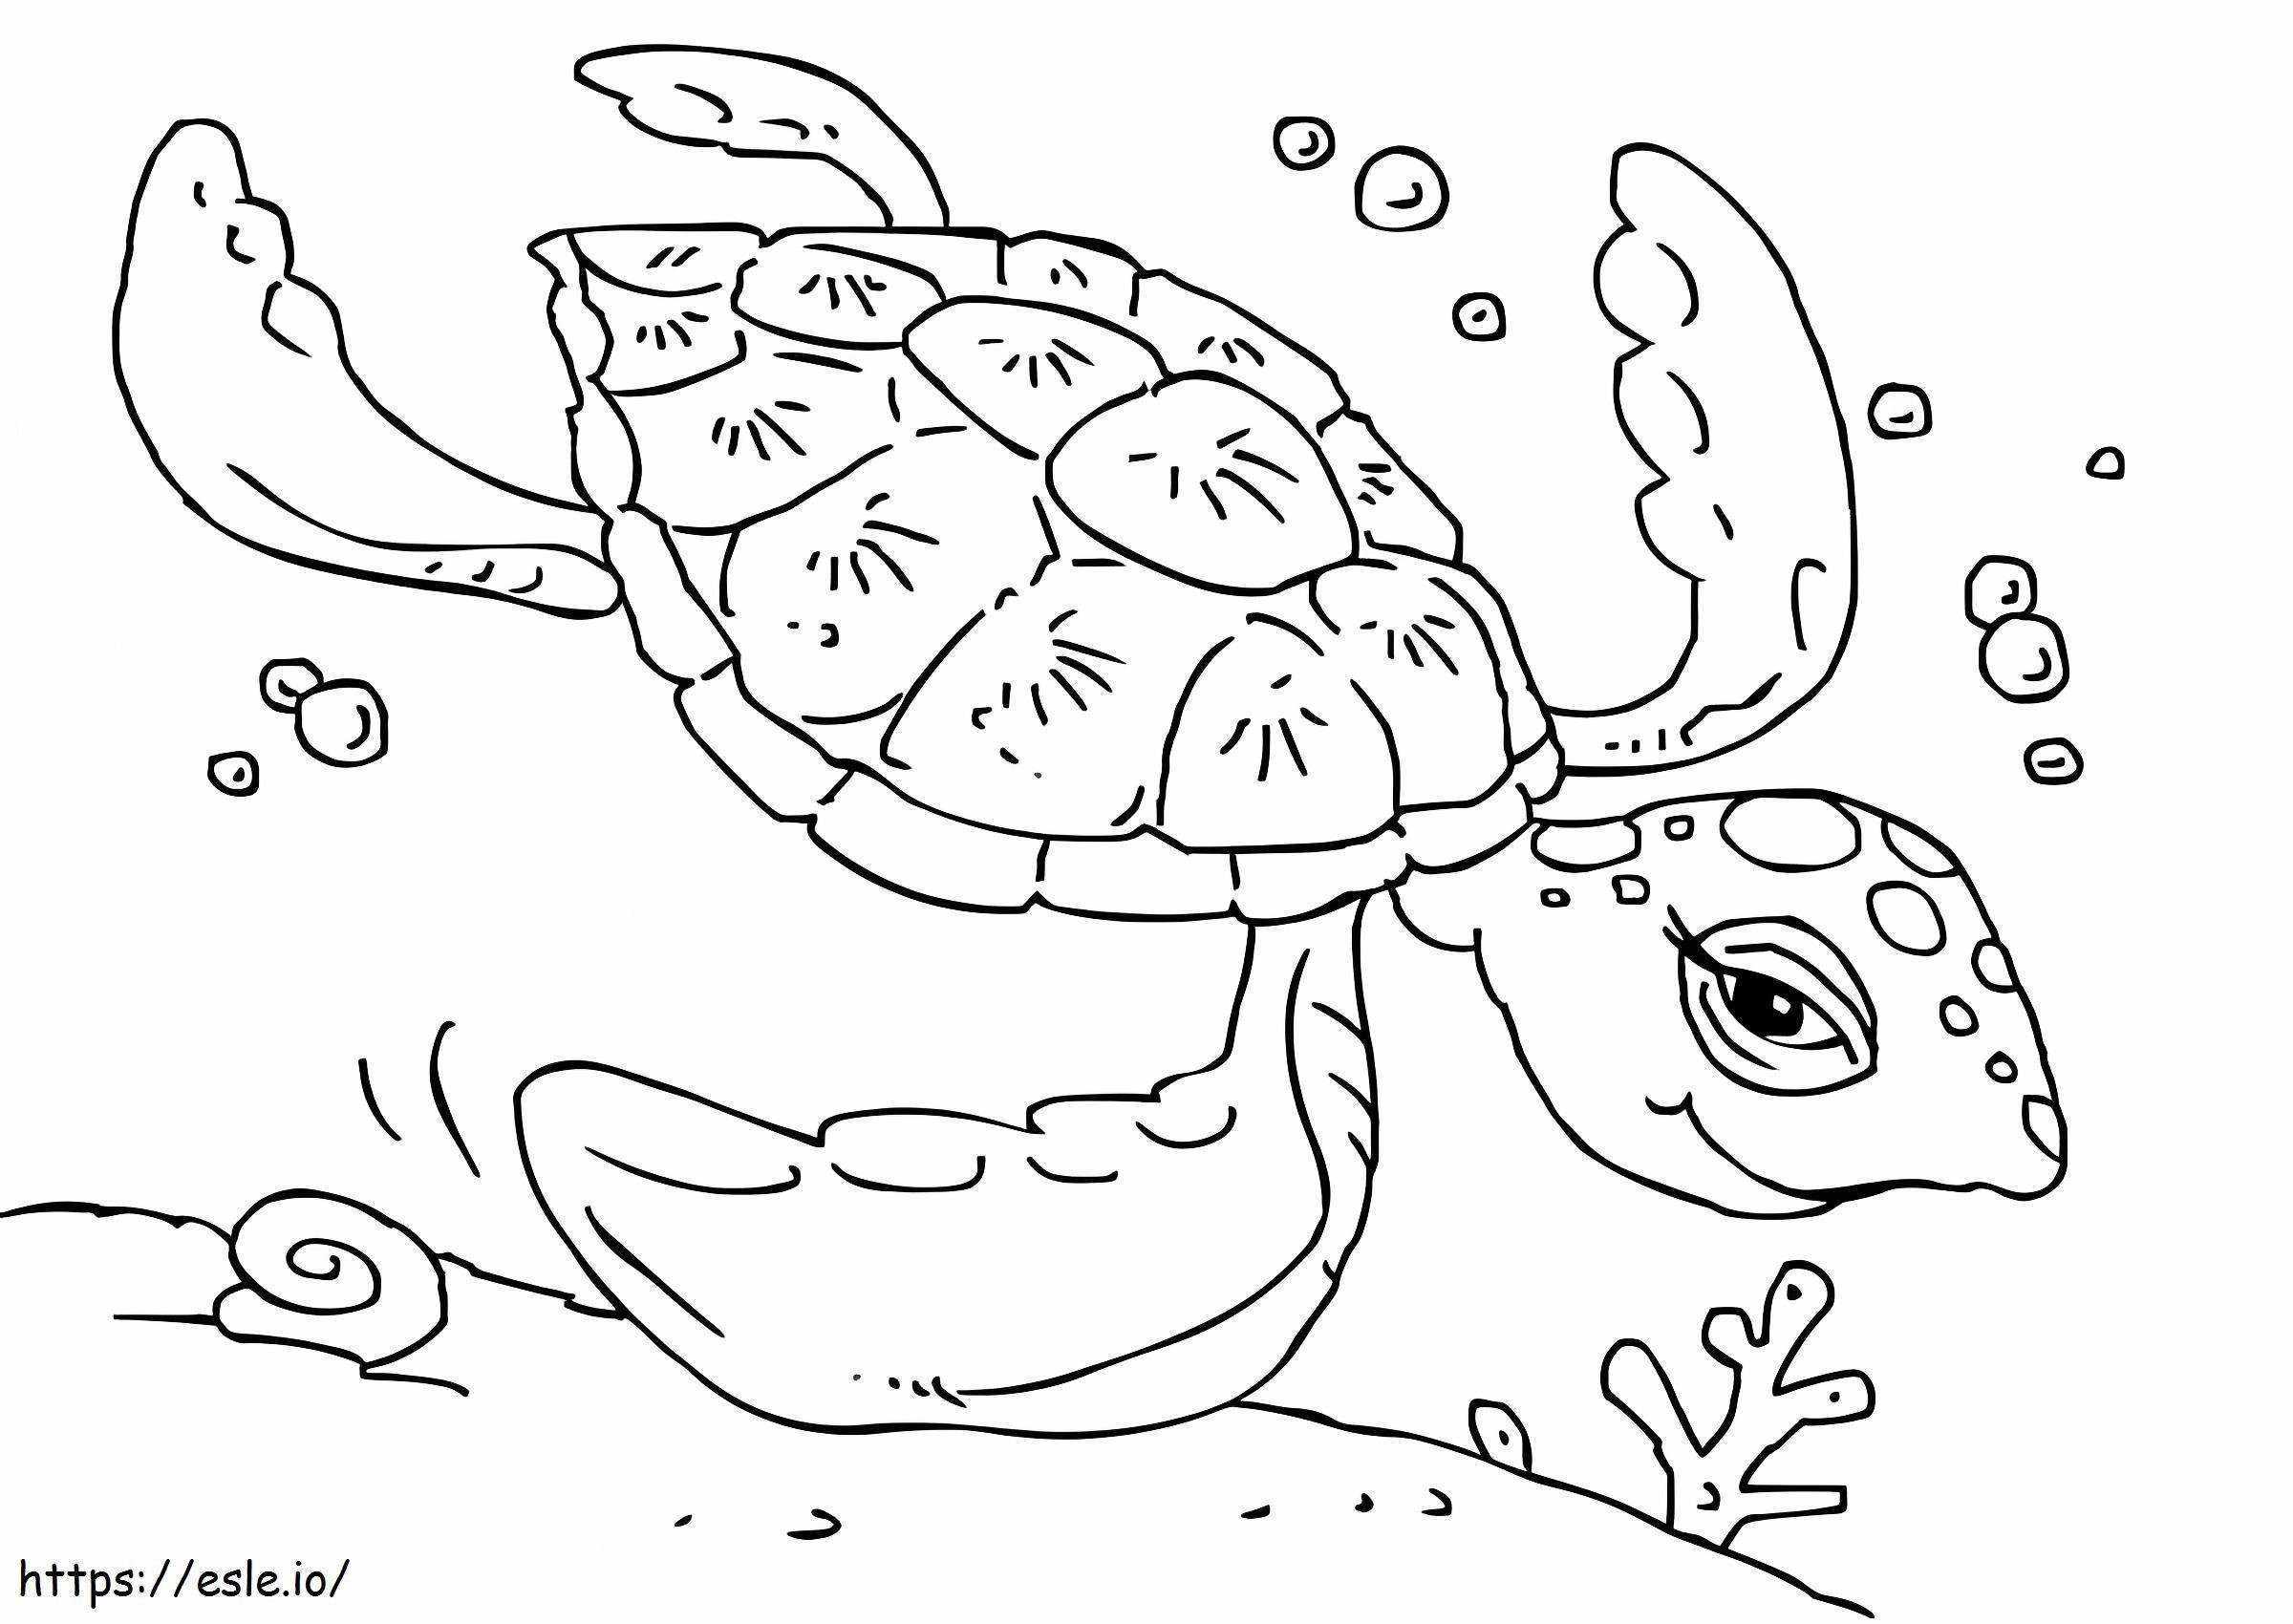 Sea Turtle Swimming 1 coloring page